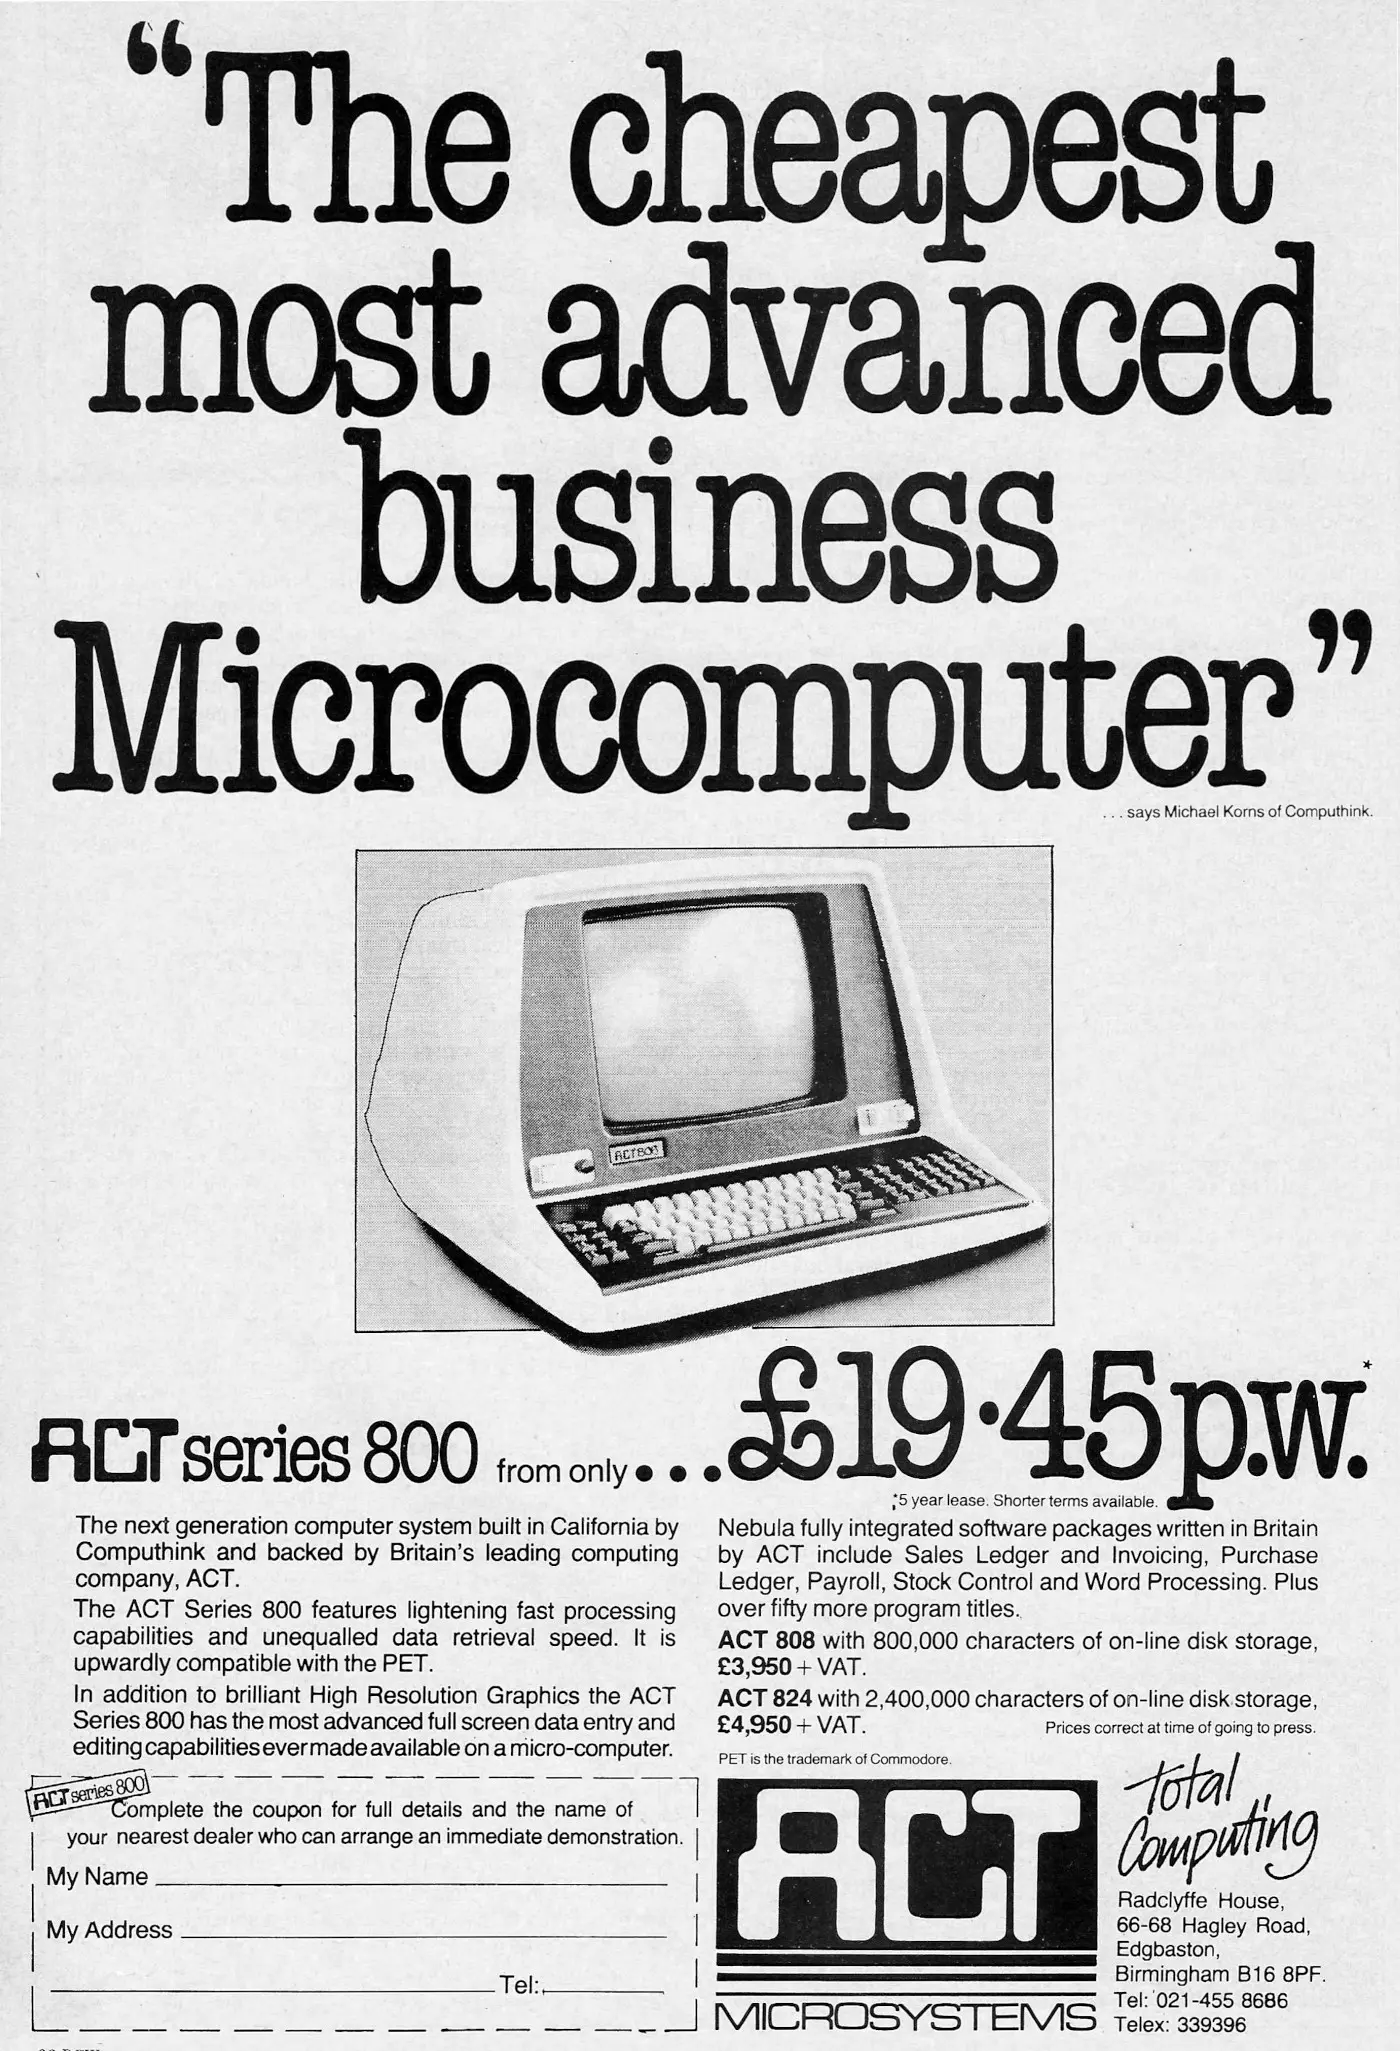 ACT/Computhink Advert: <b>The cheapest most advanced business Microcomputer</b>, from Personal Computer World, February 1980